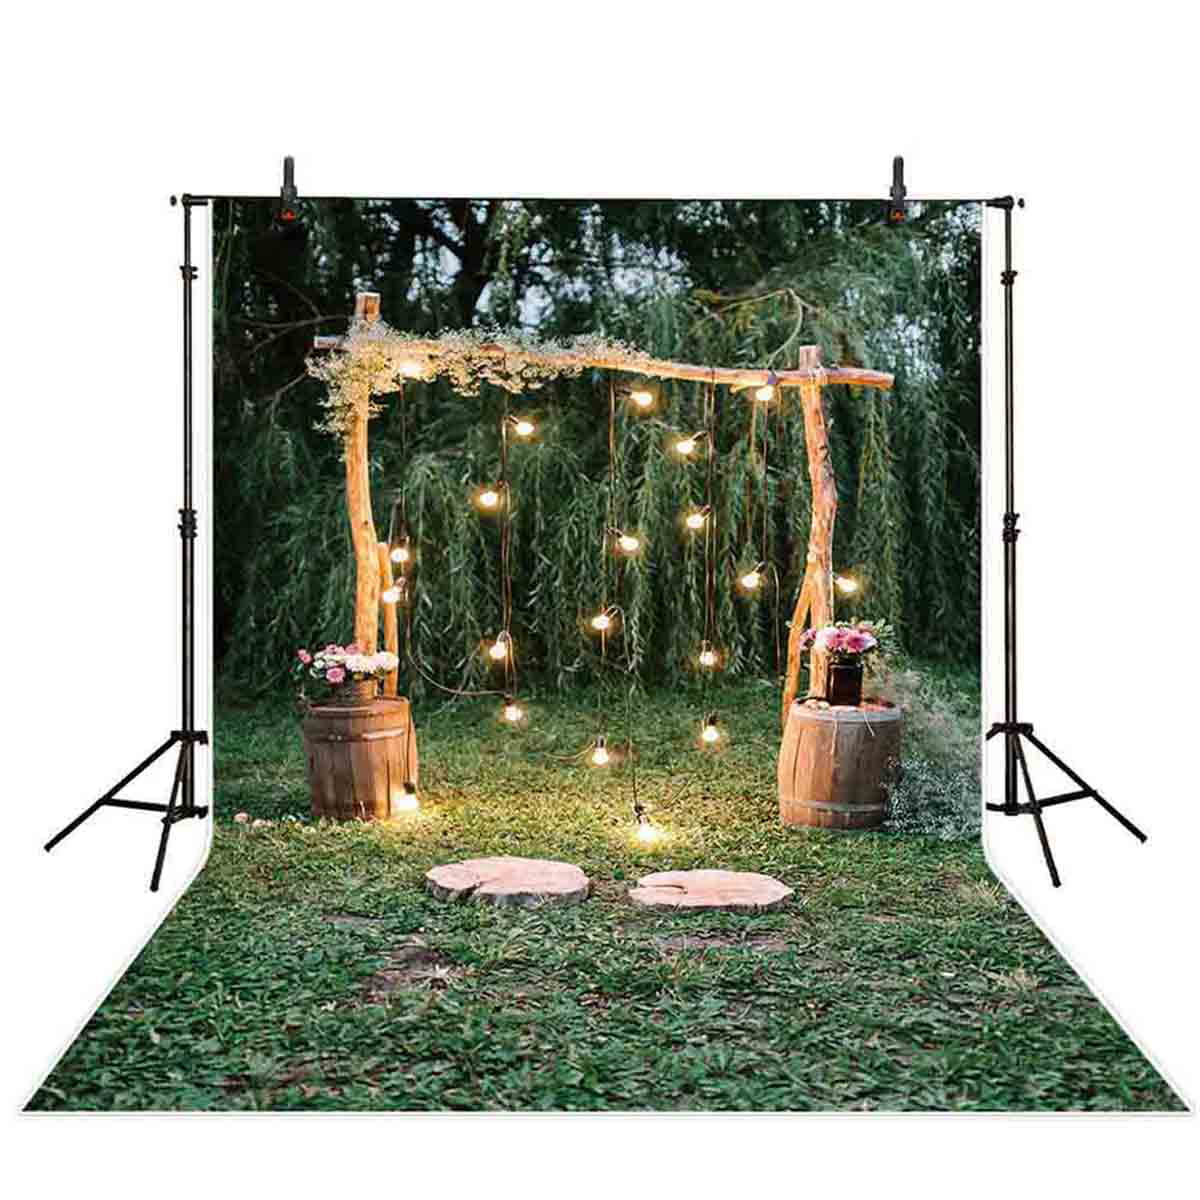 YongFoto 12x10ft Romantic Wedding Ceremony Backdrop for Photography Floral Arch with Tassels White Door Tulle Dome Lakeside Corridor Background Bridal Shower Newlyweds Anniversary Artistic Photoshoot